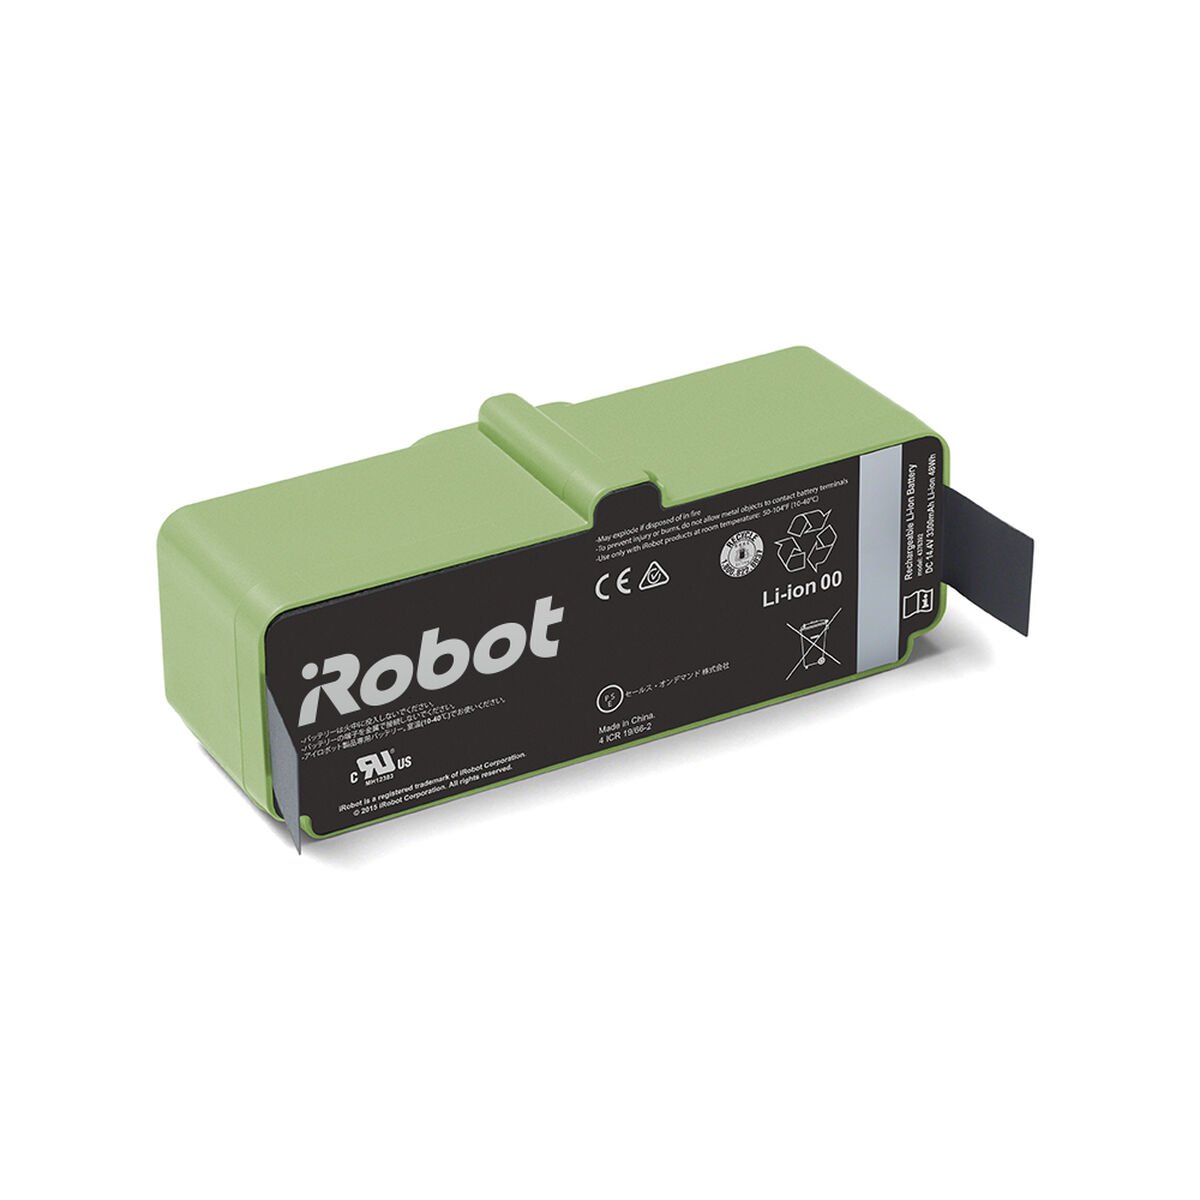 Roomba® 1800 Lithium Ion Battery, , large image number 0